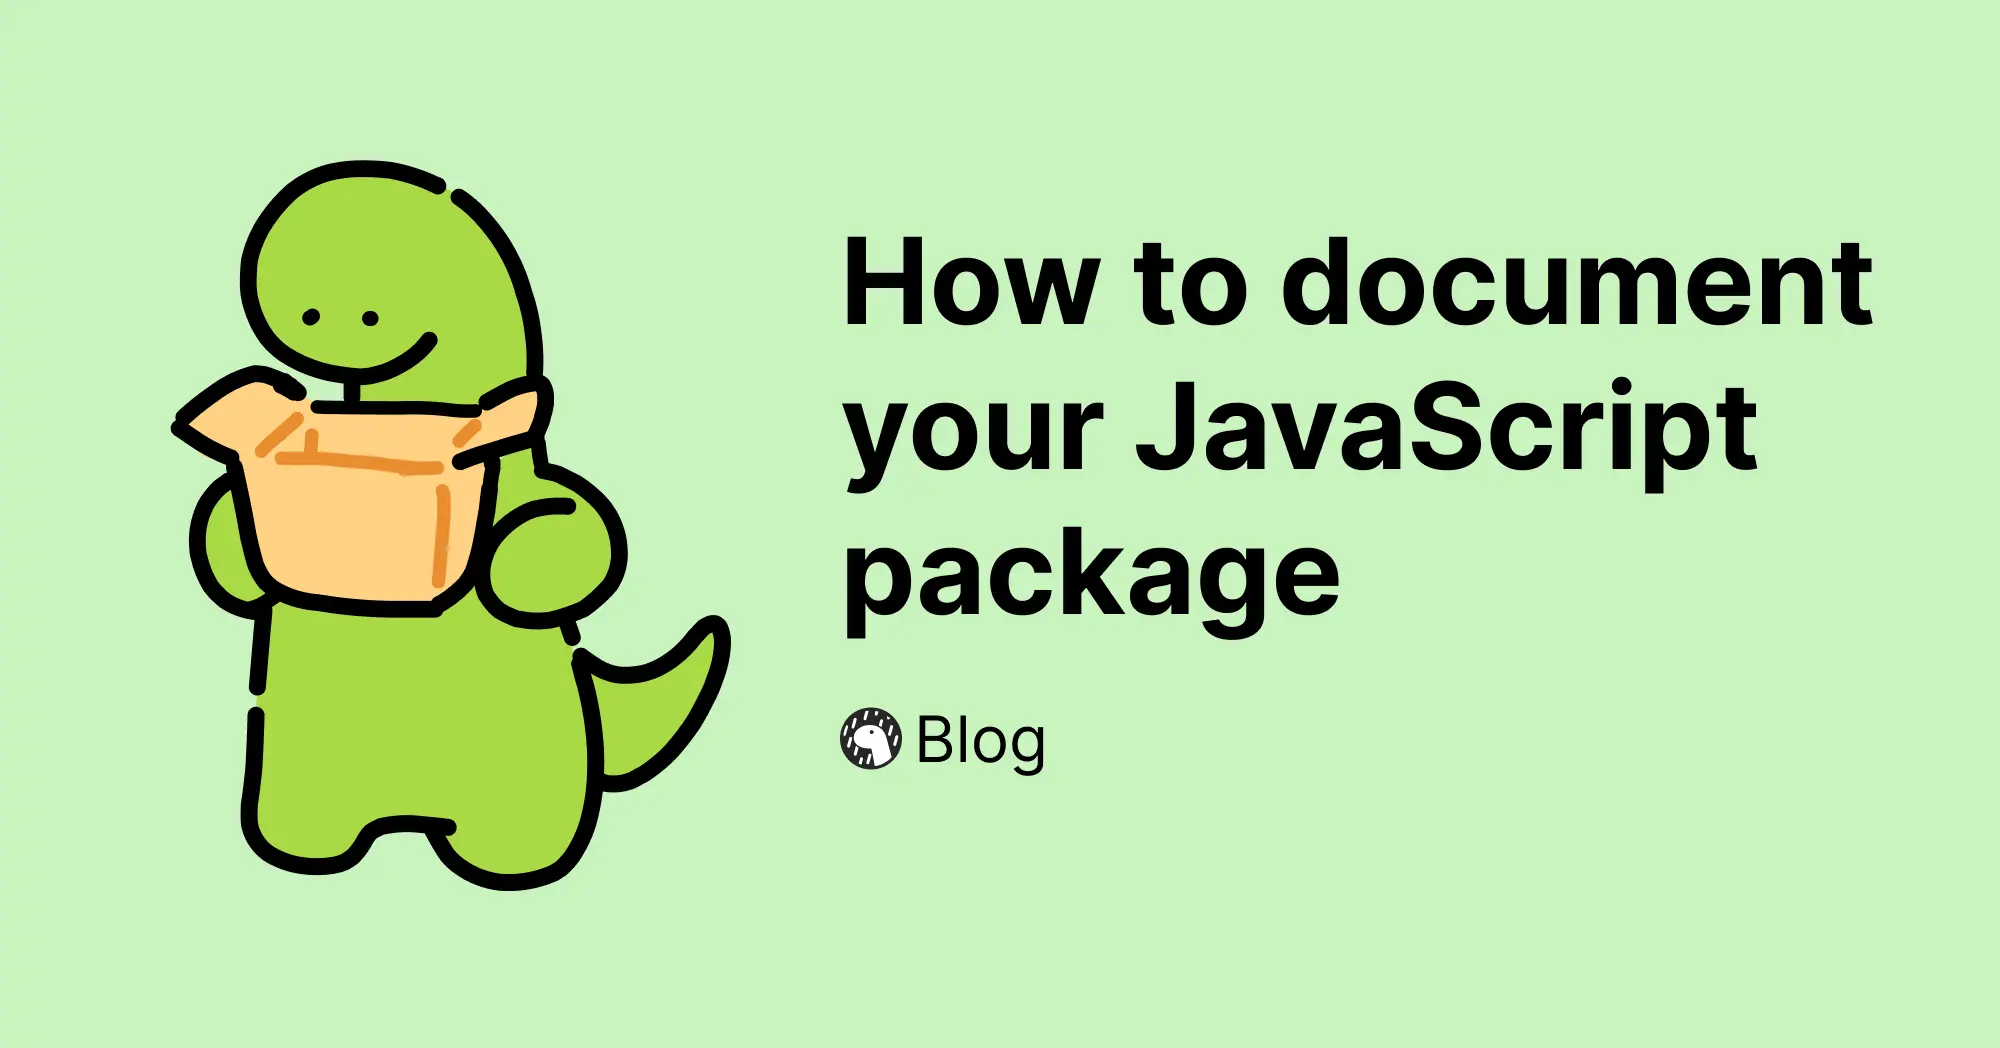 How to document your JavaScript package (15 minute read)